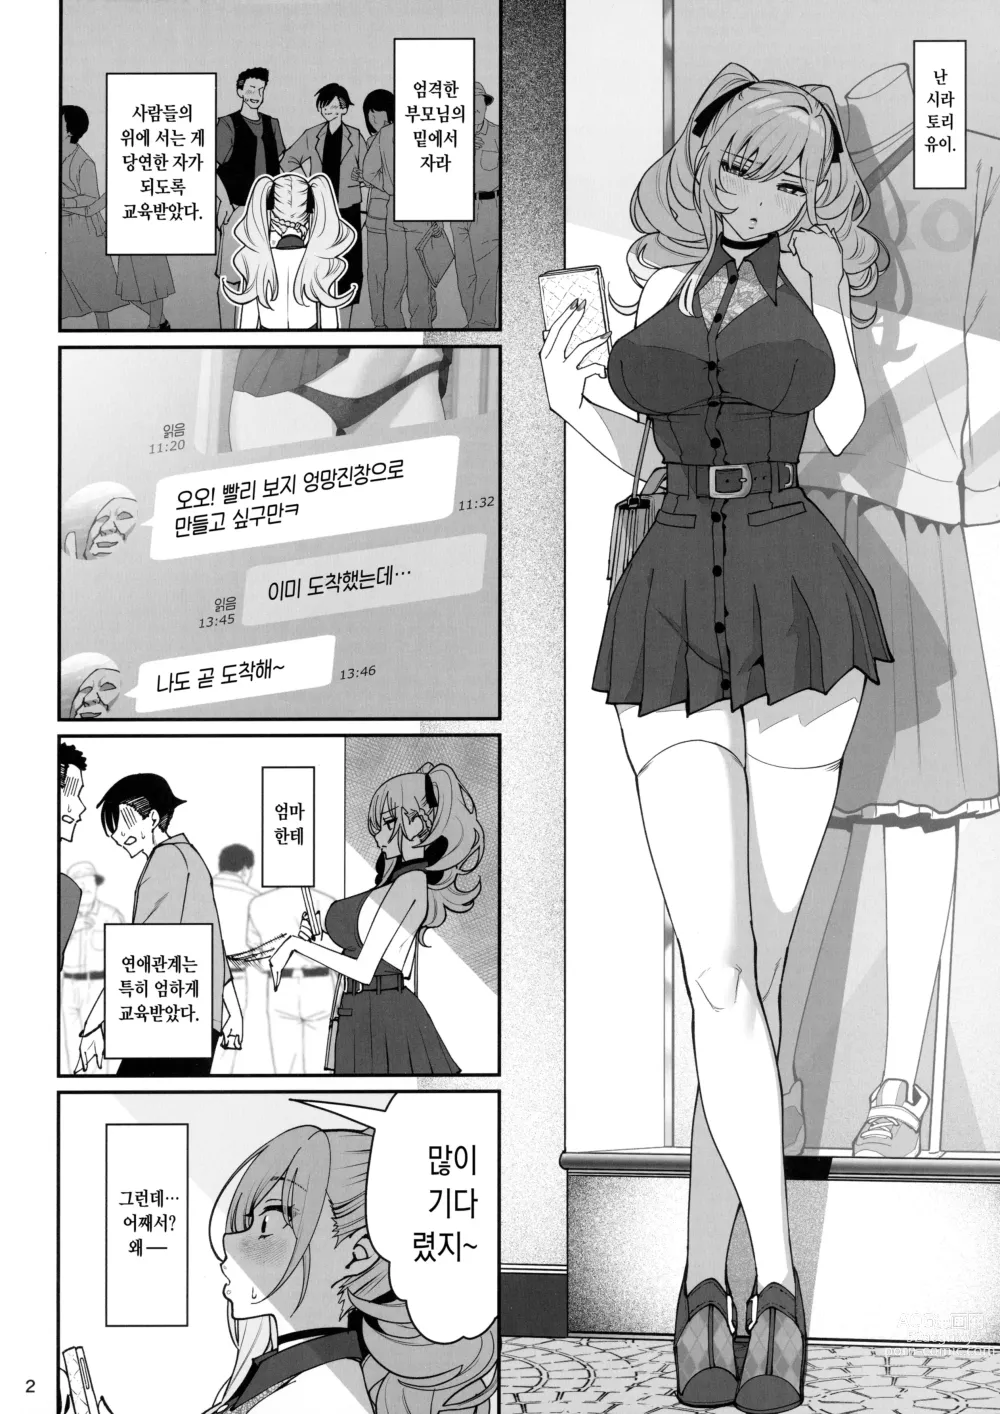 Page 3 of doujinshi 여친 최면2